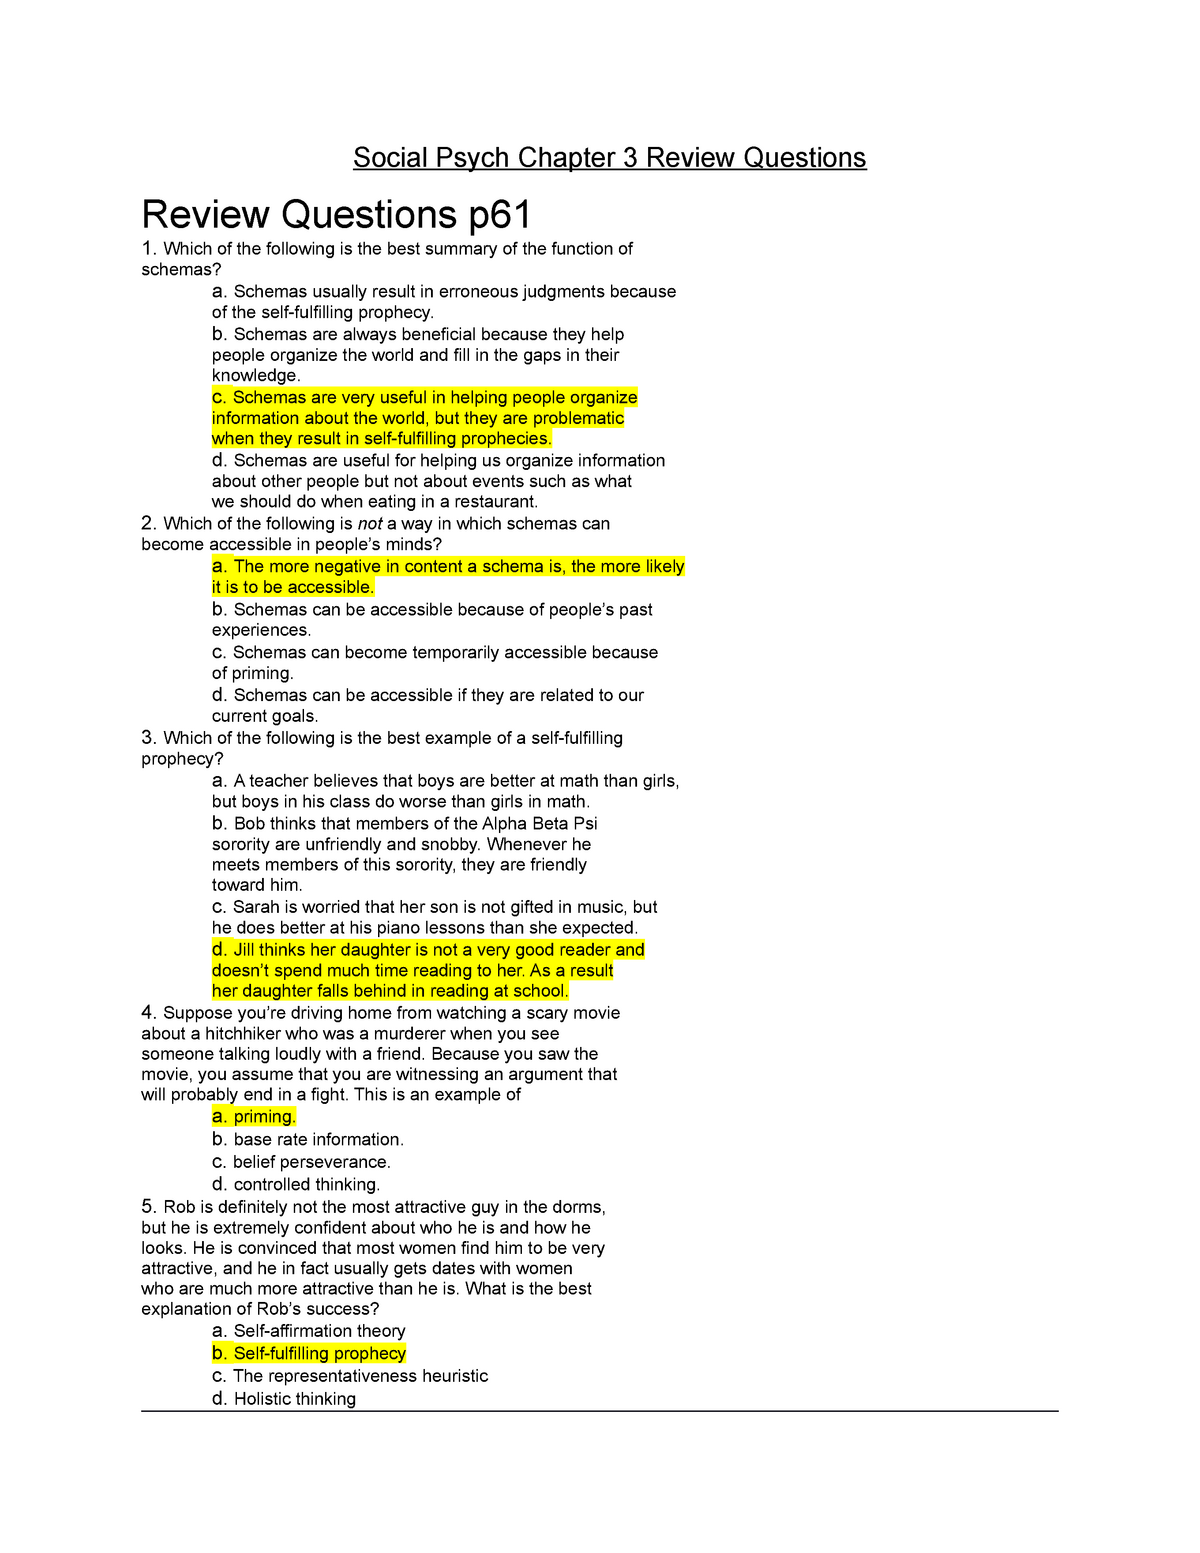 research questions on social psychology